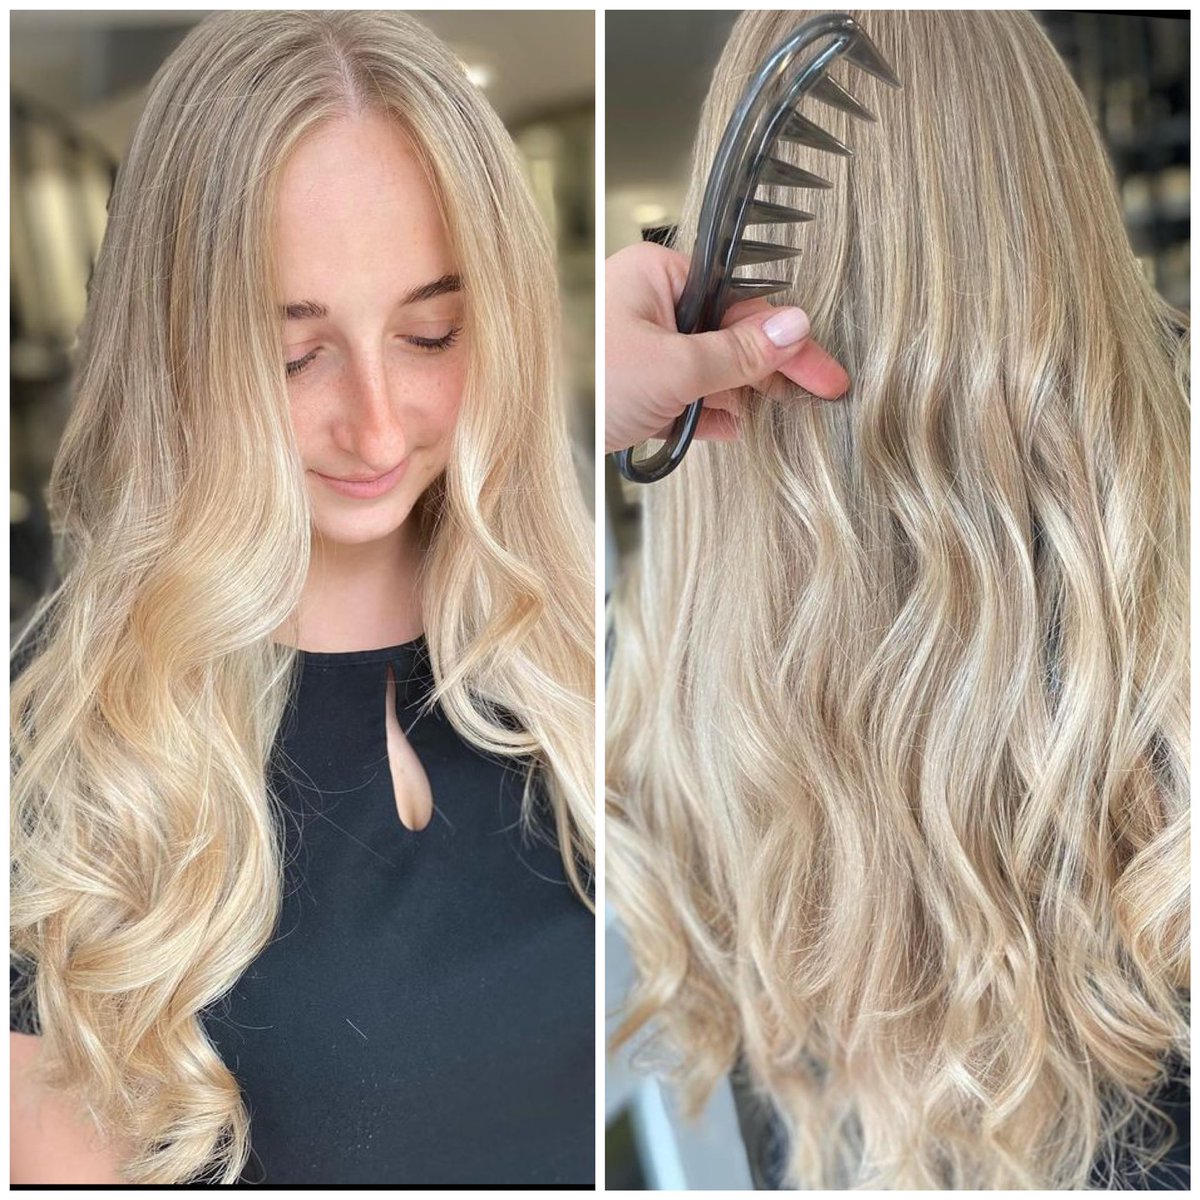 LEGALLY BLONDE ⭐️🦢

Amie wanted her blonde locks freshening up and toned to give this glossy blended natural result 👌🏼 

#houseoffinesse #hof #hofaltrincham #houseoffinessealtrincham #goosegreen #altrincham #urmston #wella #wellauki #wellahair #wellaprofessional #blowave